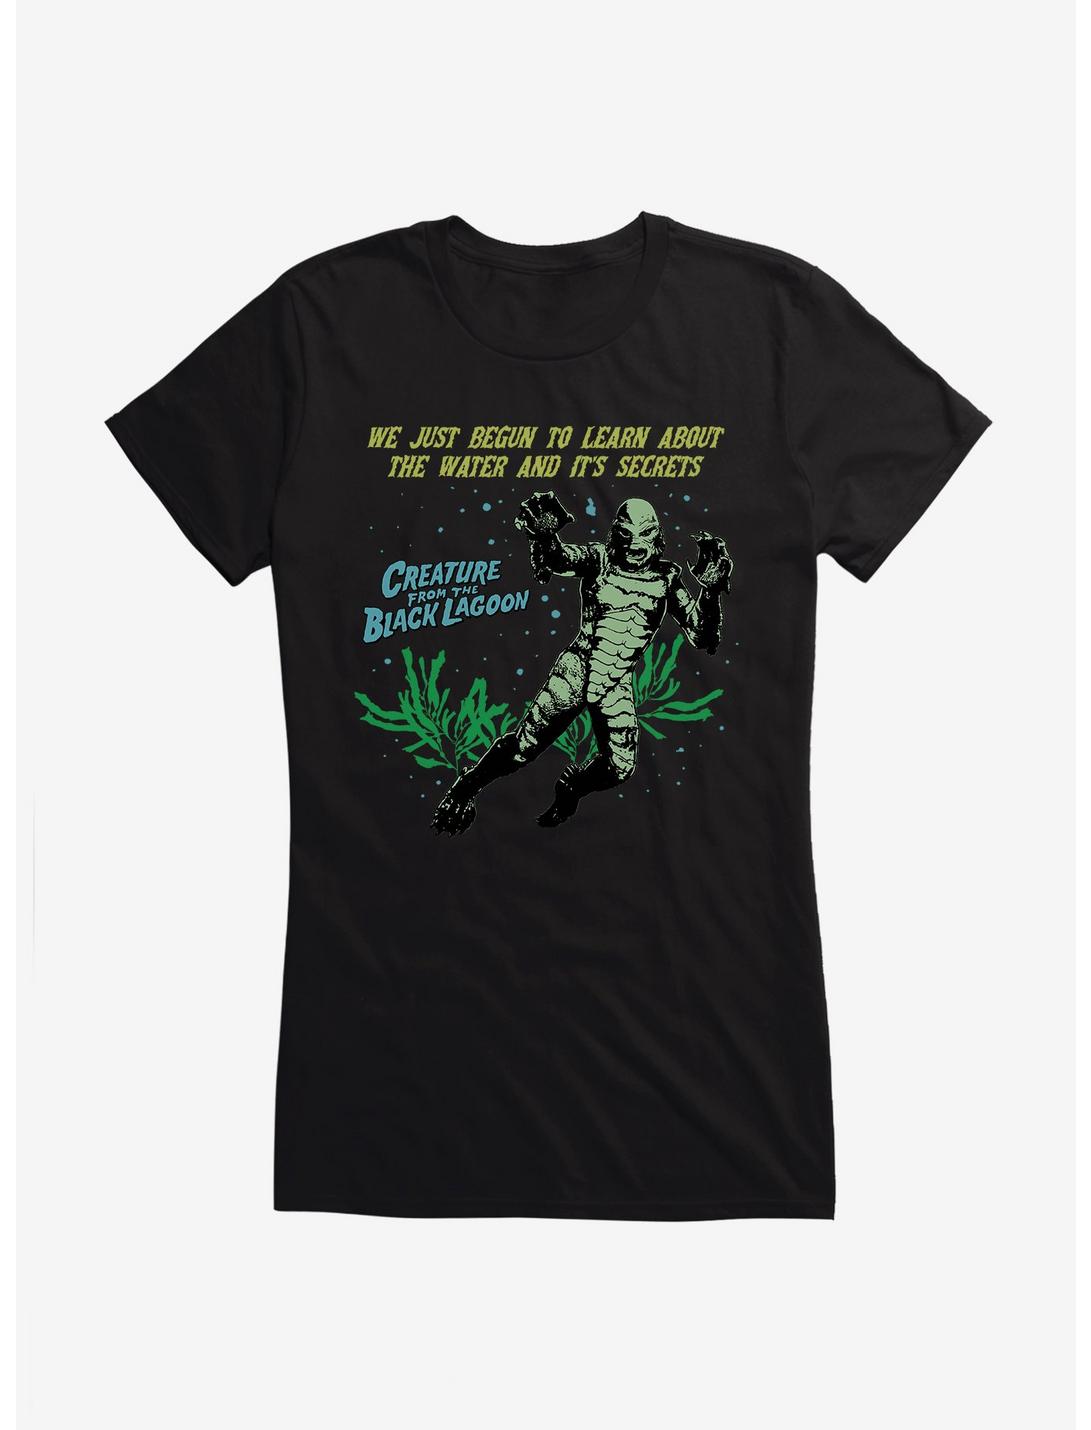 Creature From The Black Lagoon Water And It's Secrets Girls T-Shirt, BLACK, hi-res